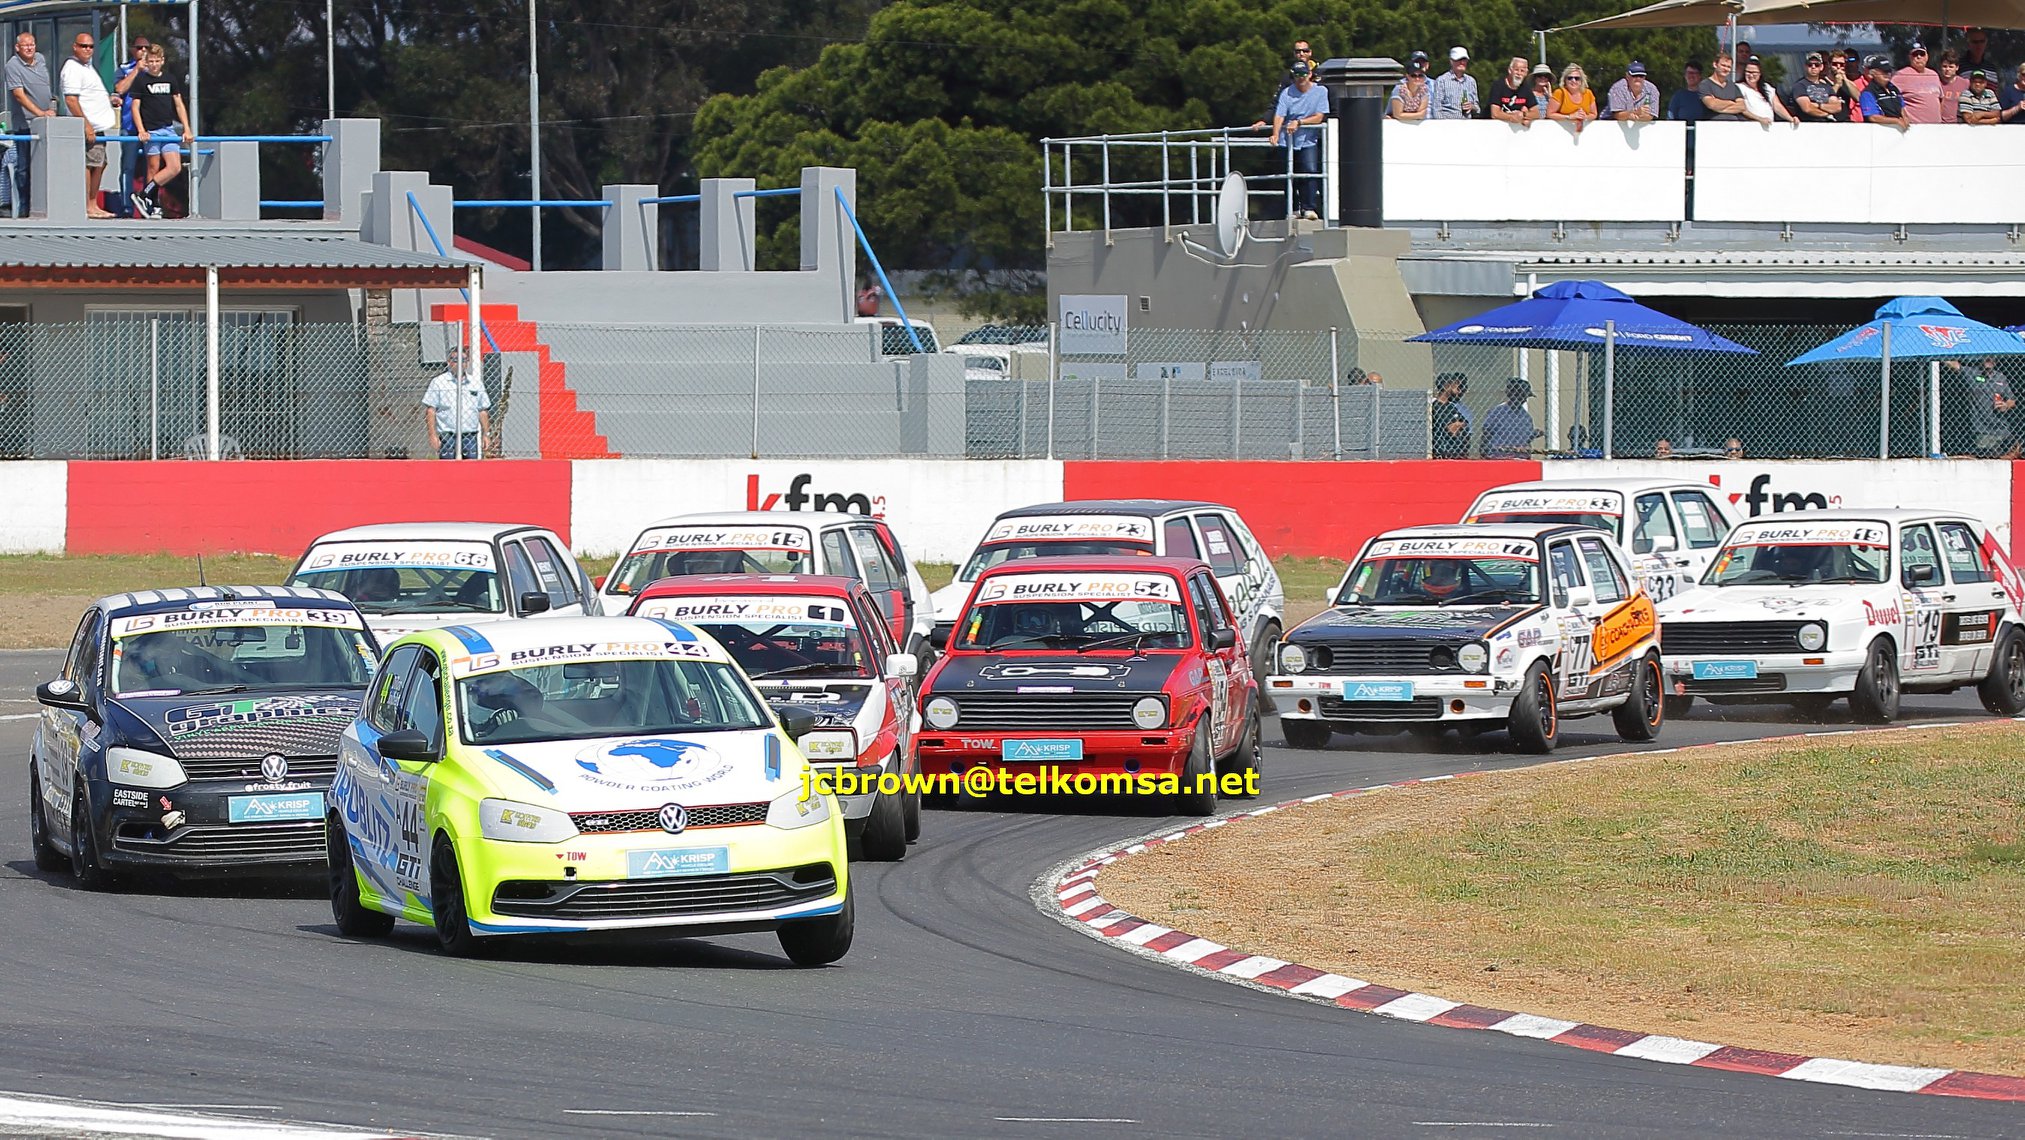 KILLARNEY’S POWER SERIES REVS UP FOR THE FINAL SHOWDOWN OF 2019